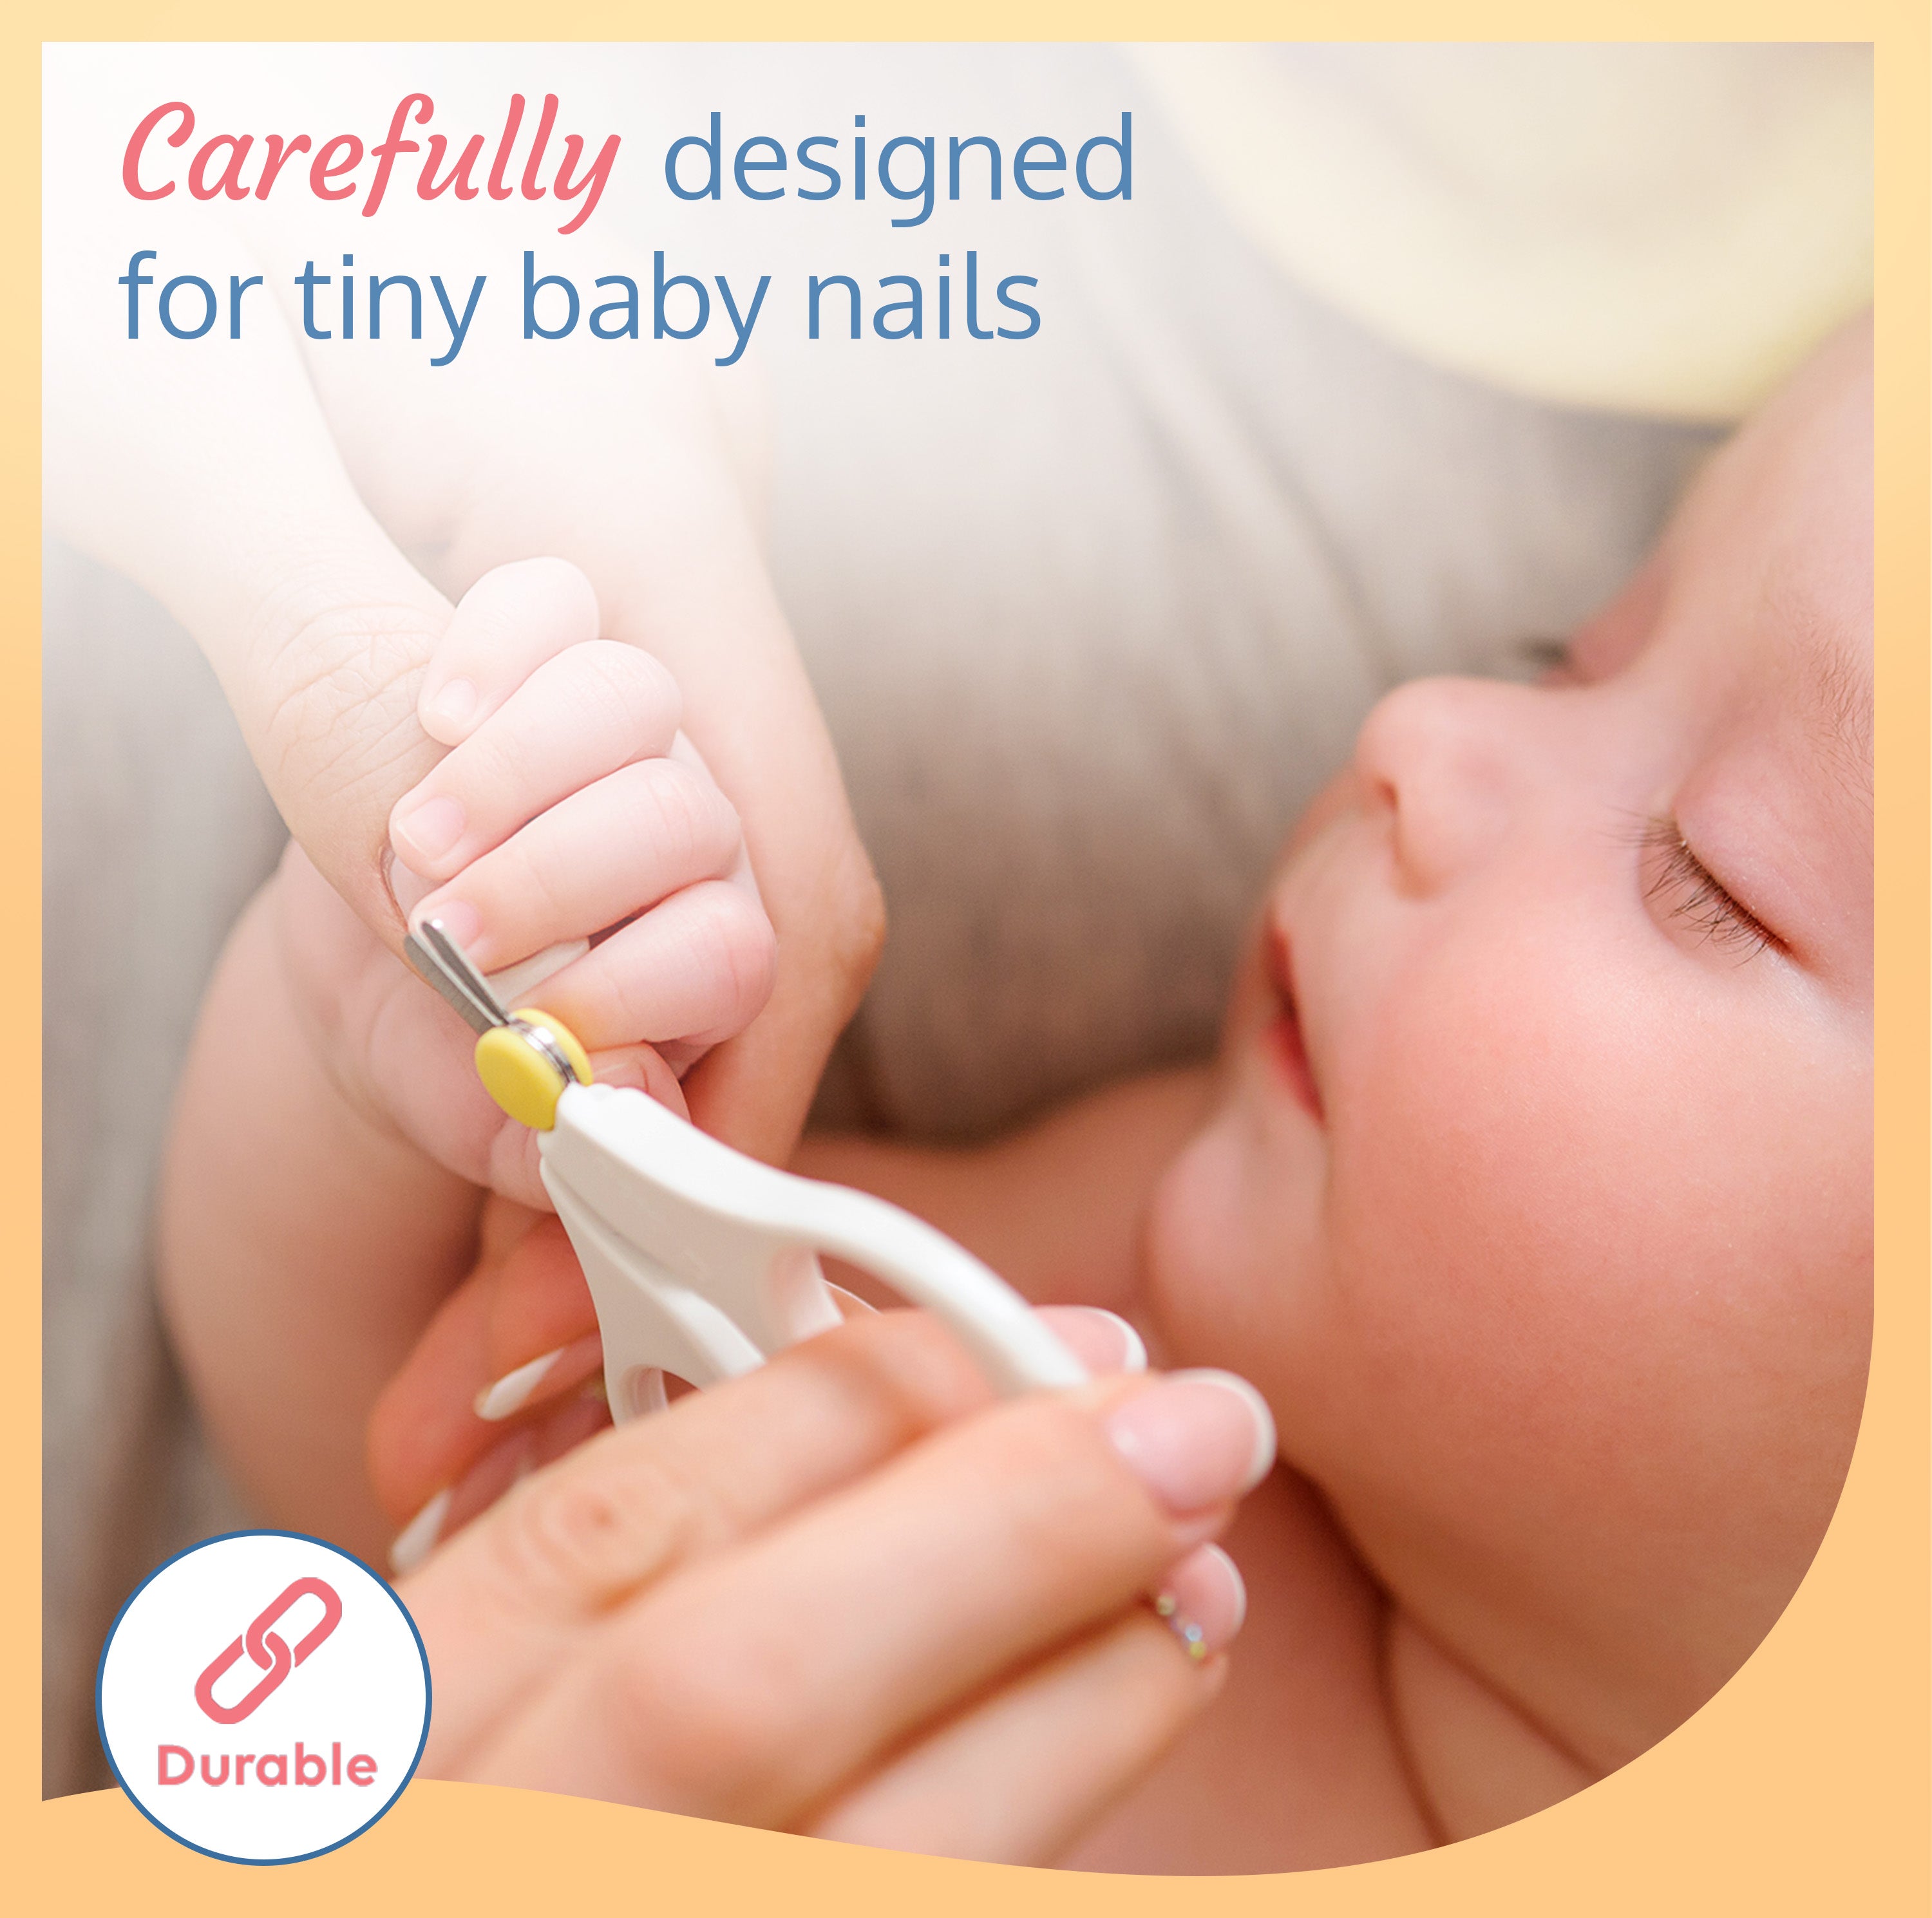 How to Cut Baby Nails Safely: A Step-by-Step Guide